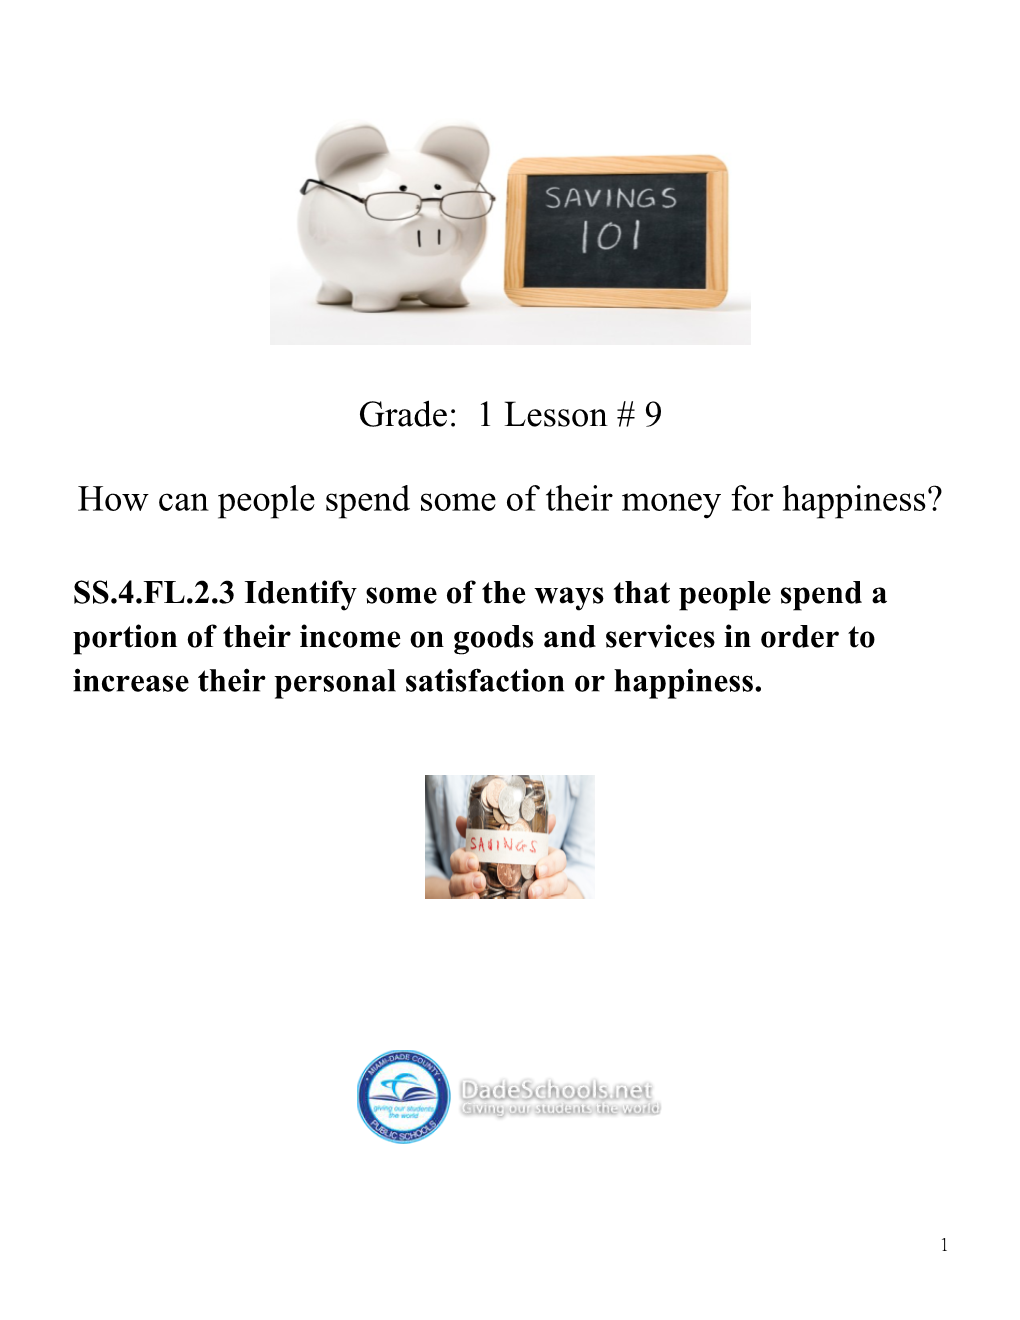 How Can People Spend Some of Their Money for Happiness?